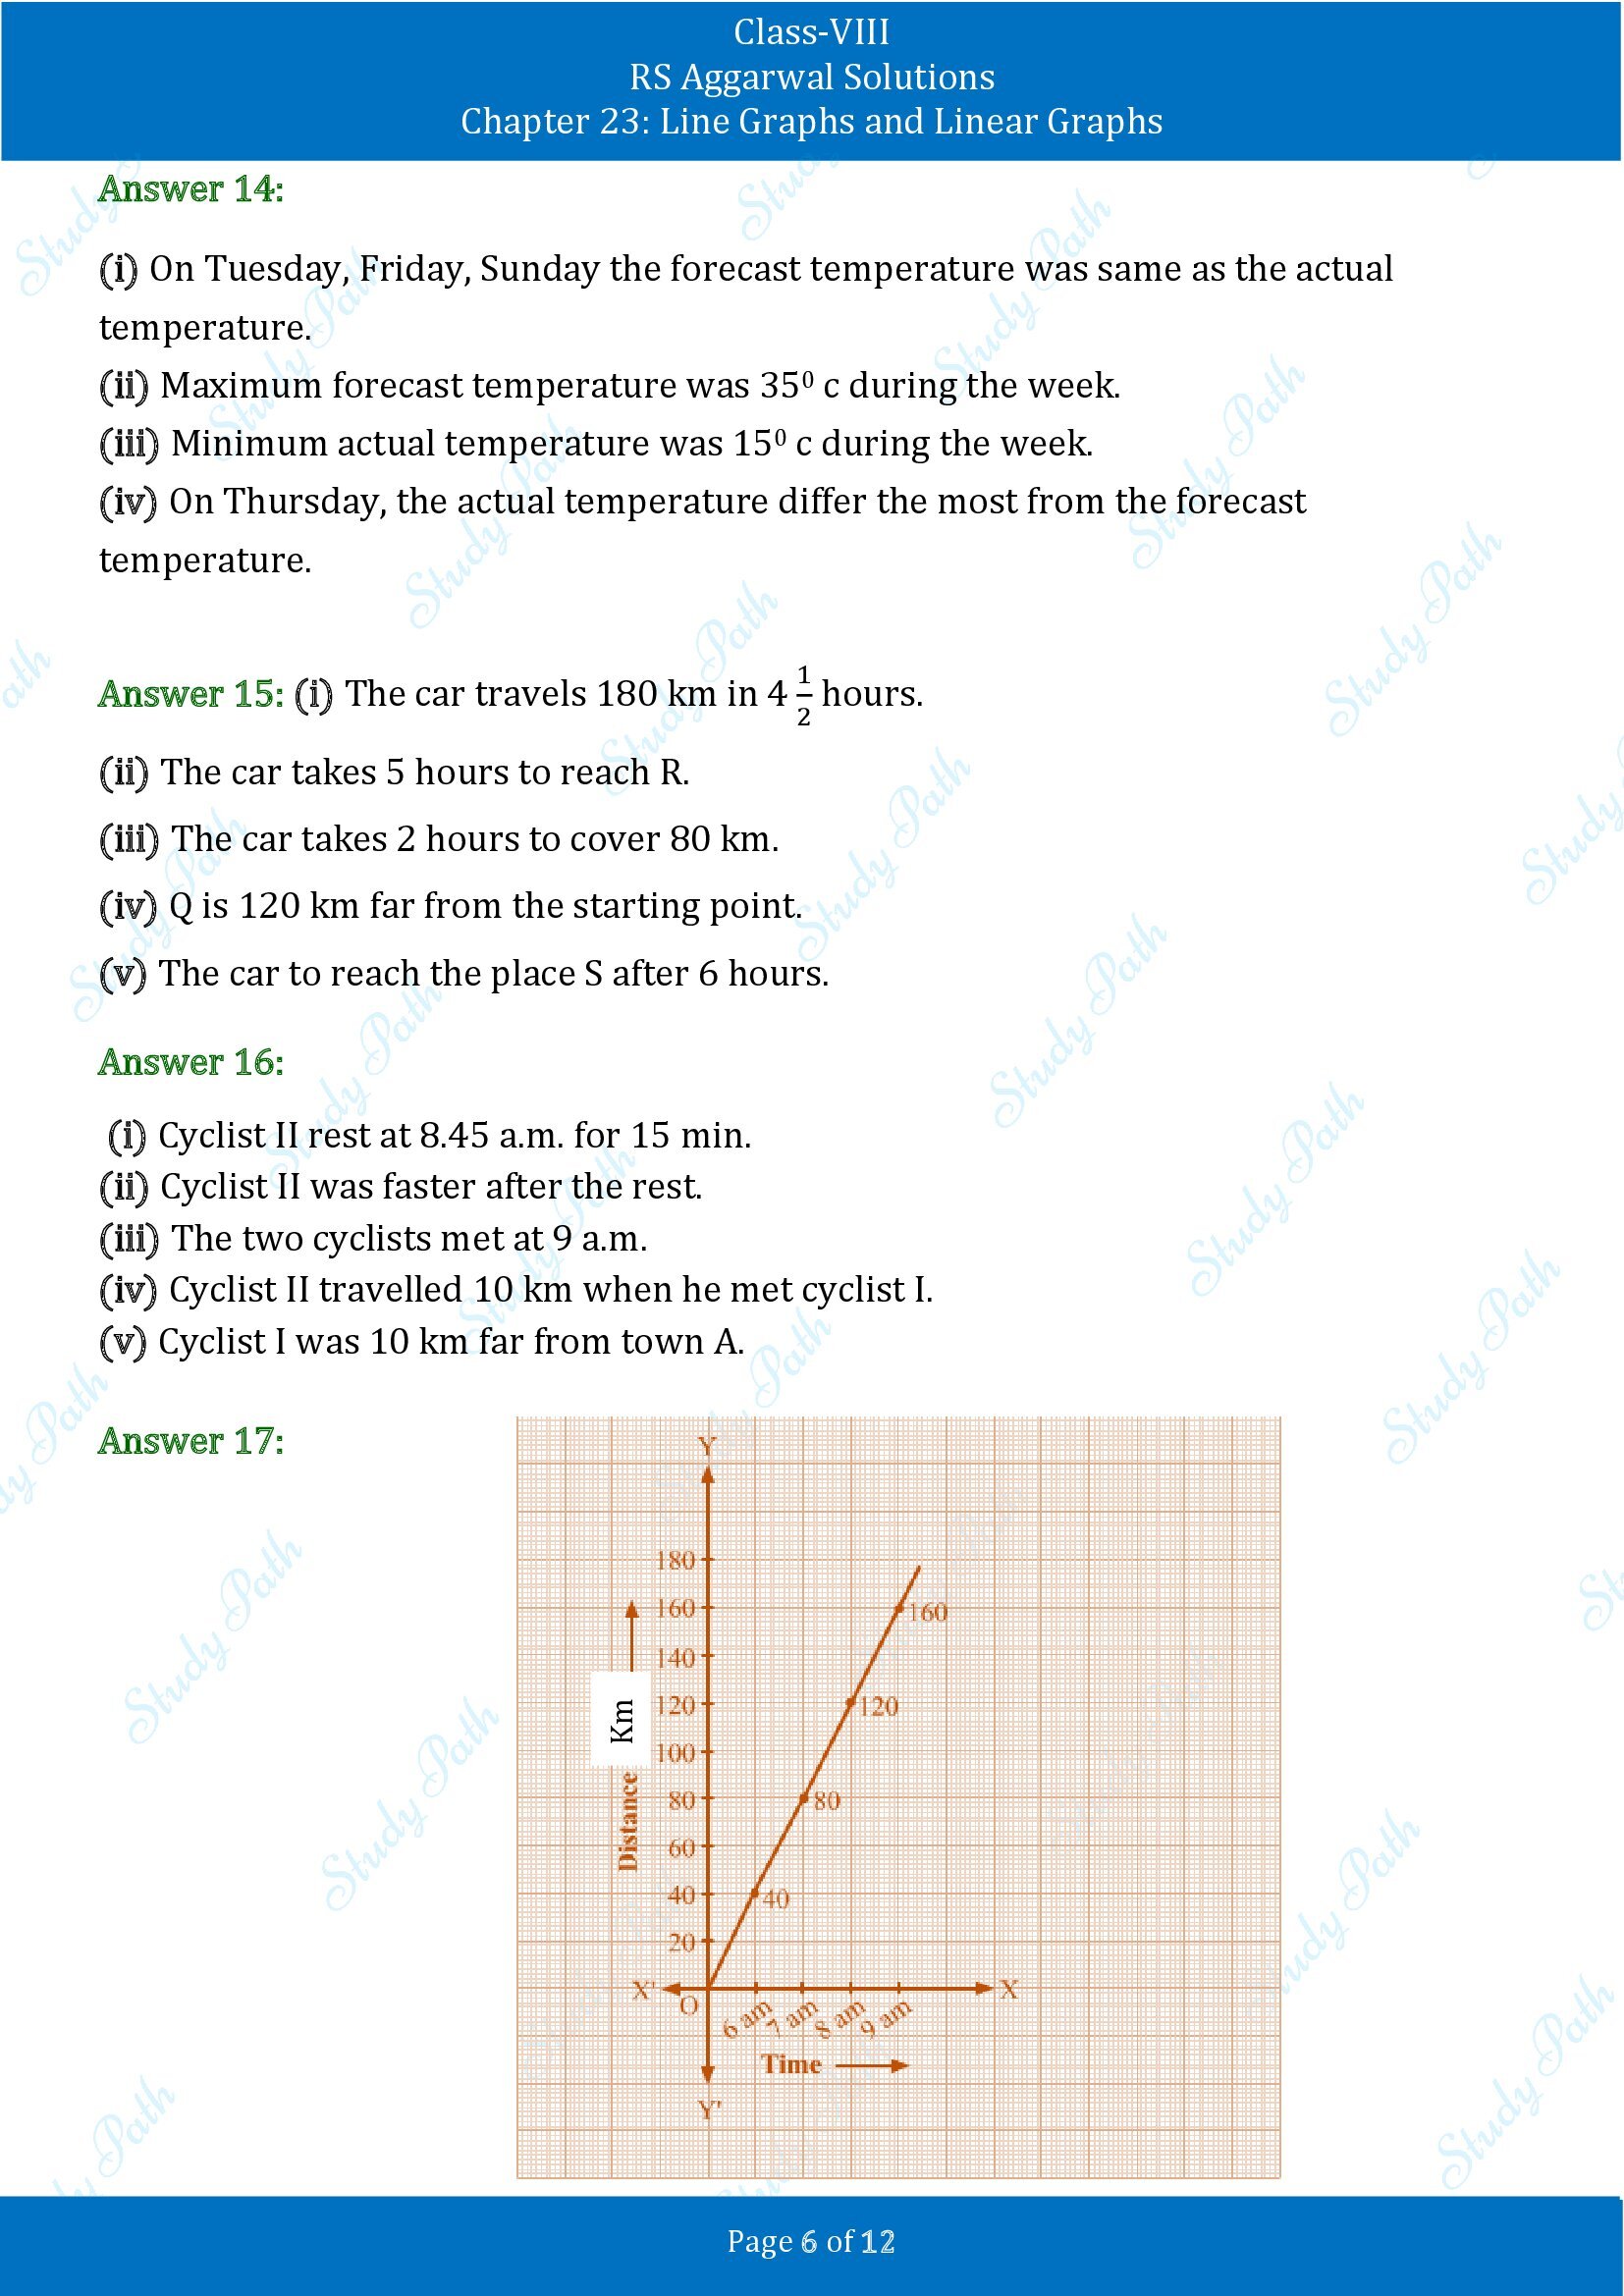 RS Aggarwal Solutions Class 8 Chapter 23 Line Graphs and Linear Graphs Exercise 23 00006